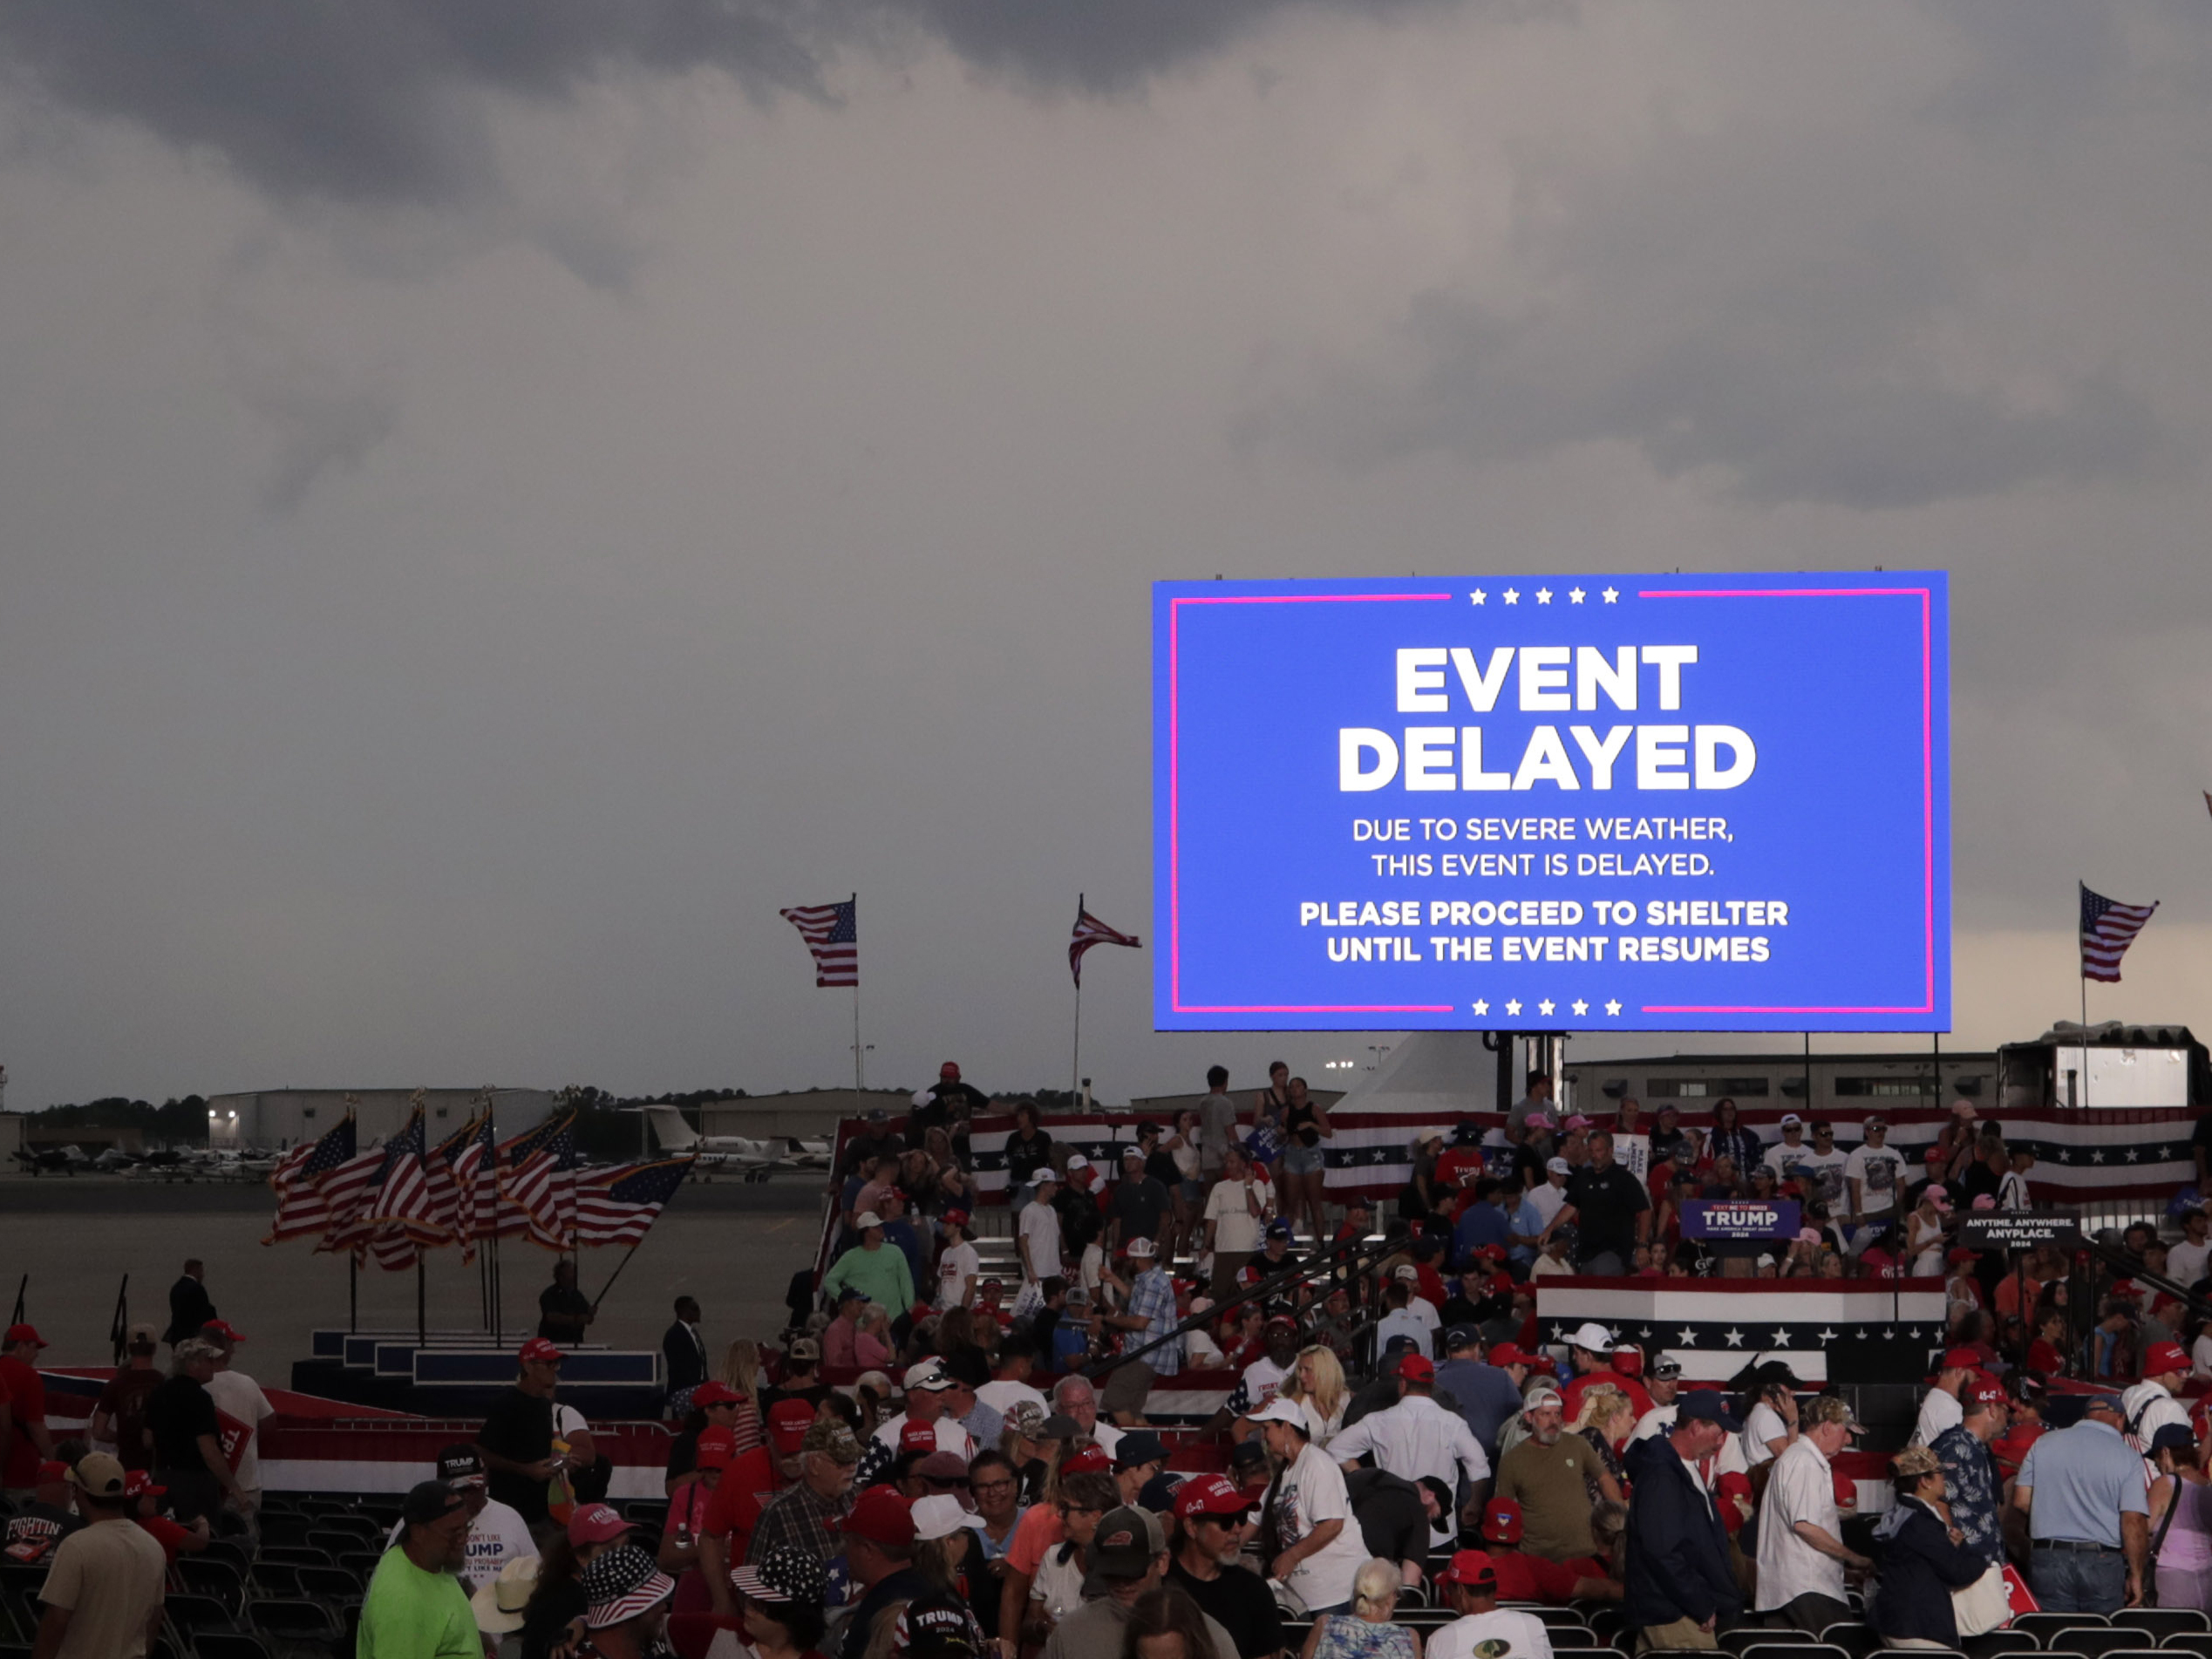 Trump cancels rally due to weather, as he tries to balance his trial and campaign